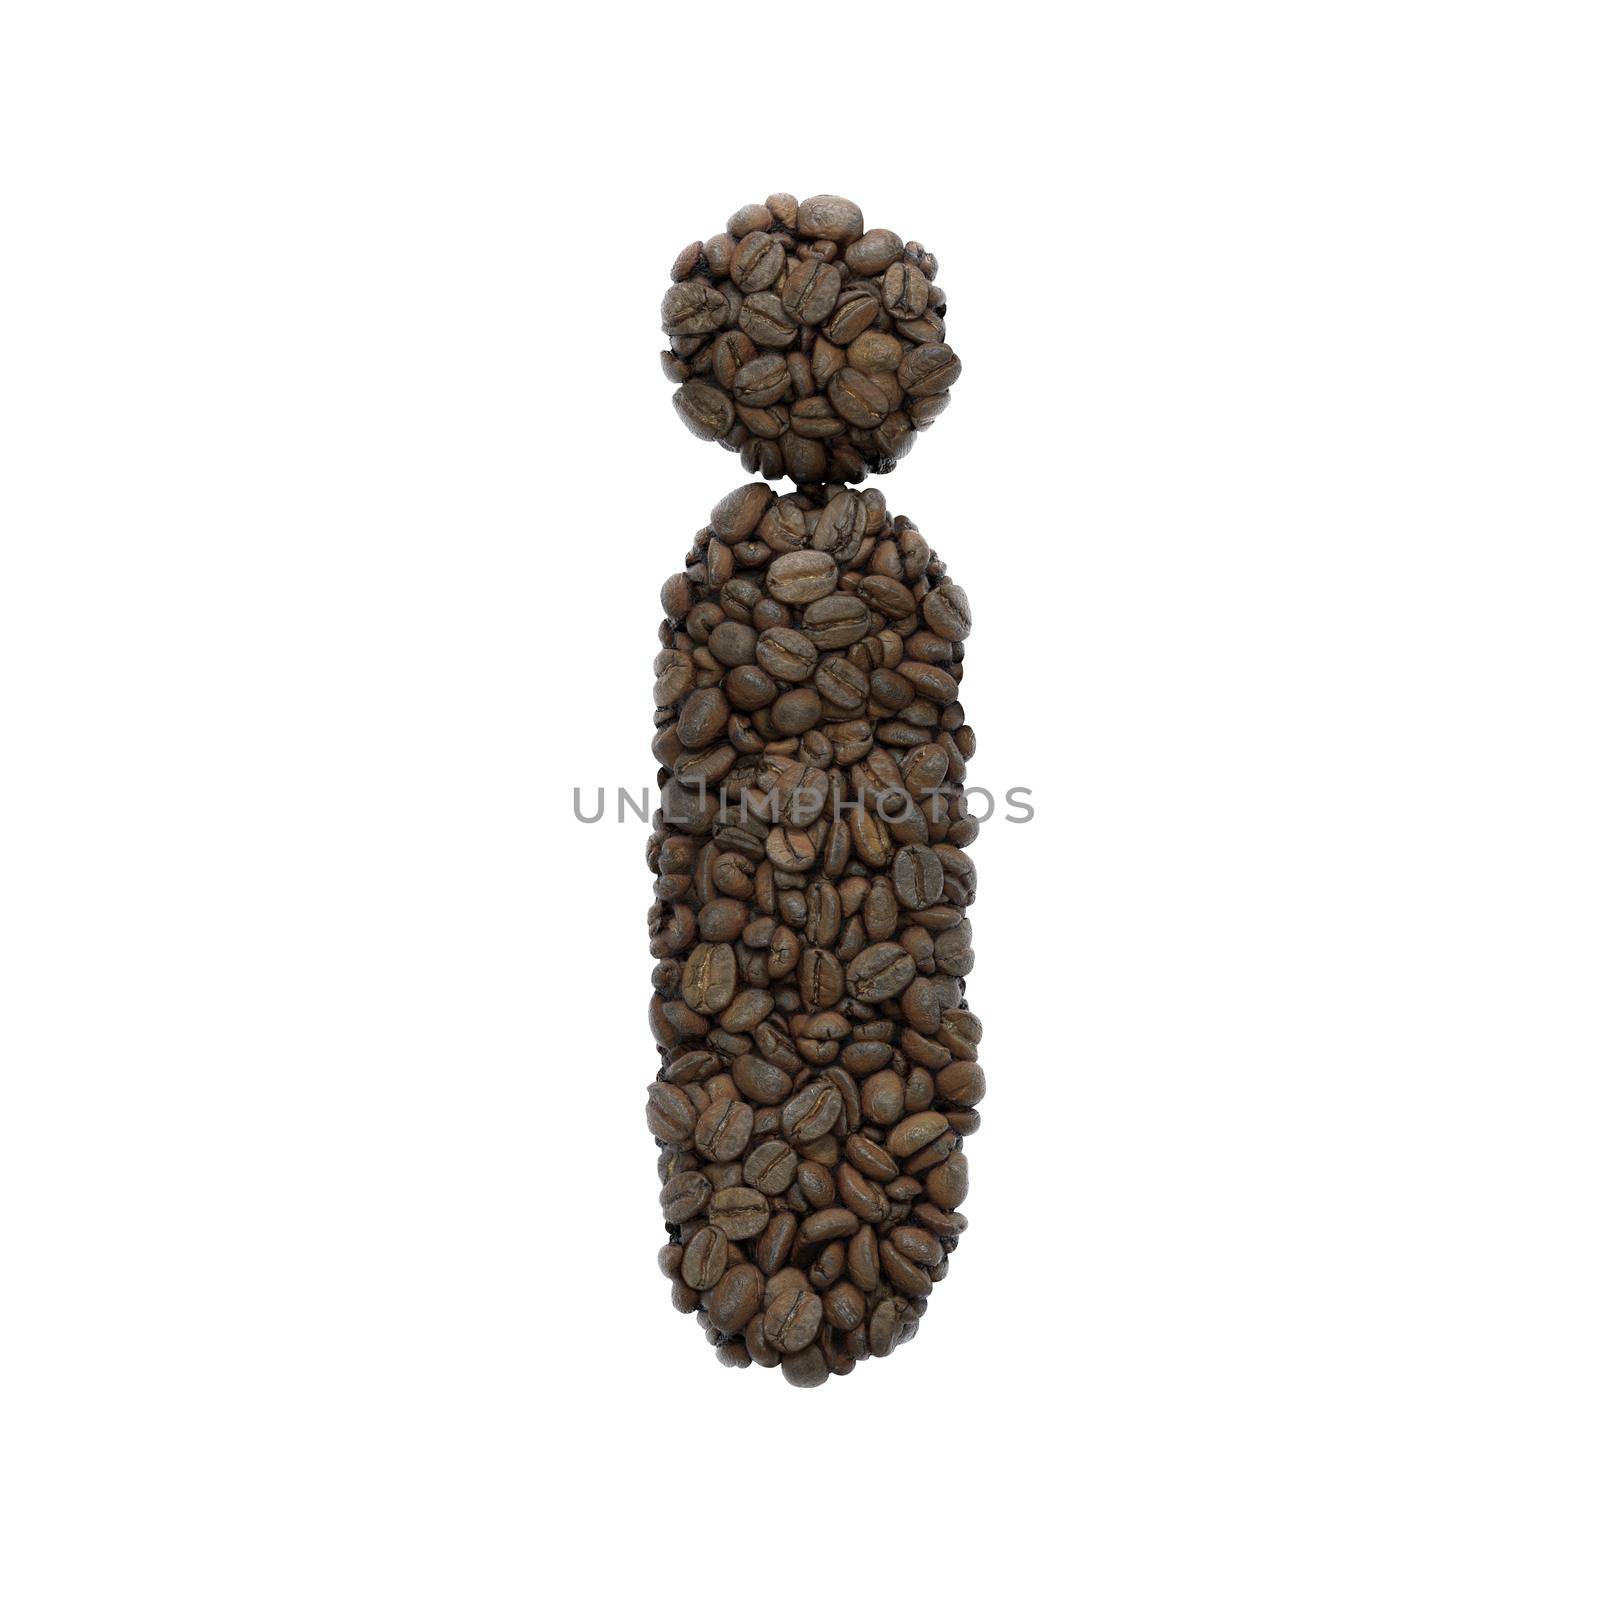 Coffee letter I - Small 3d roasted beans font - Suitable for Coffee, energy or insomnia related subjects by chrisroll